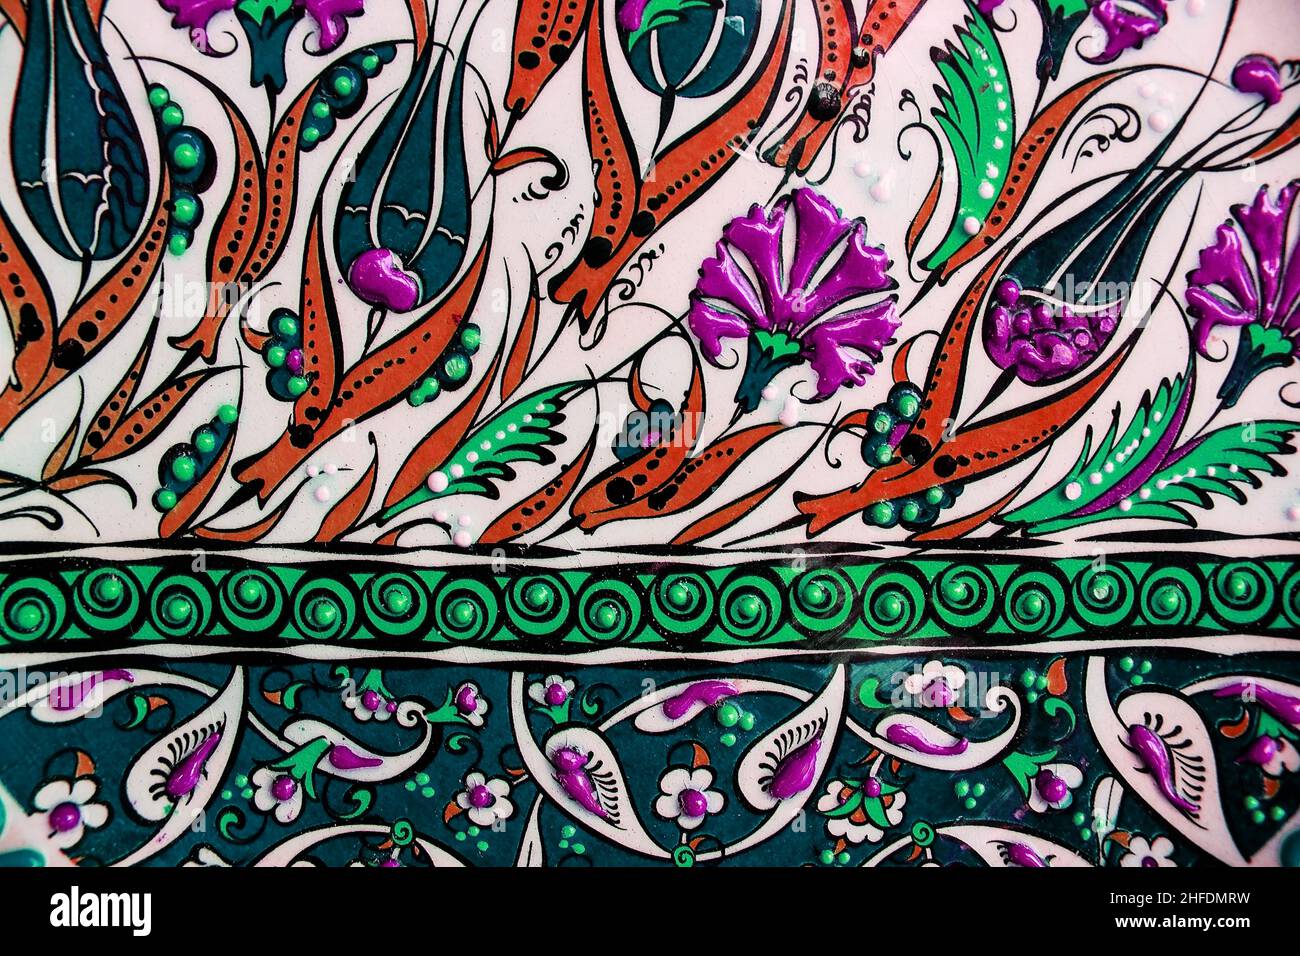 Traditional ottoman patterns on the porcelain surface. Traditional Turkish tile art called cini. Çini patterns. Çini art. Ottoman floral motifs. Stock Photo